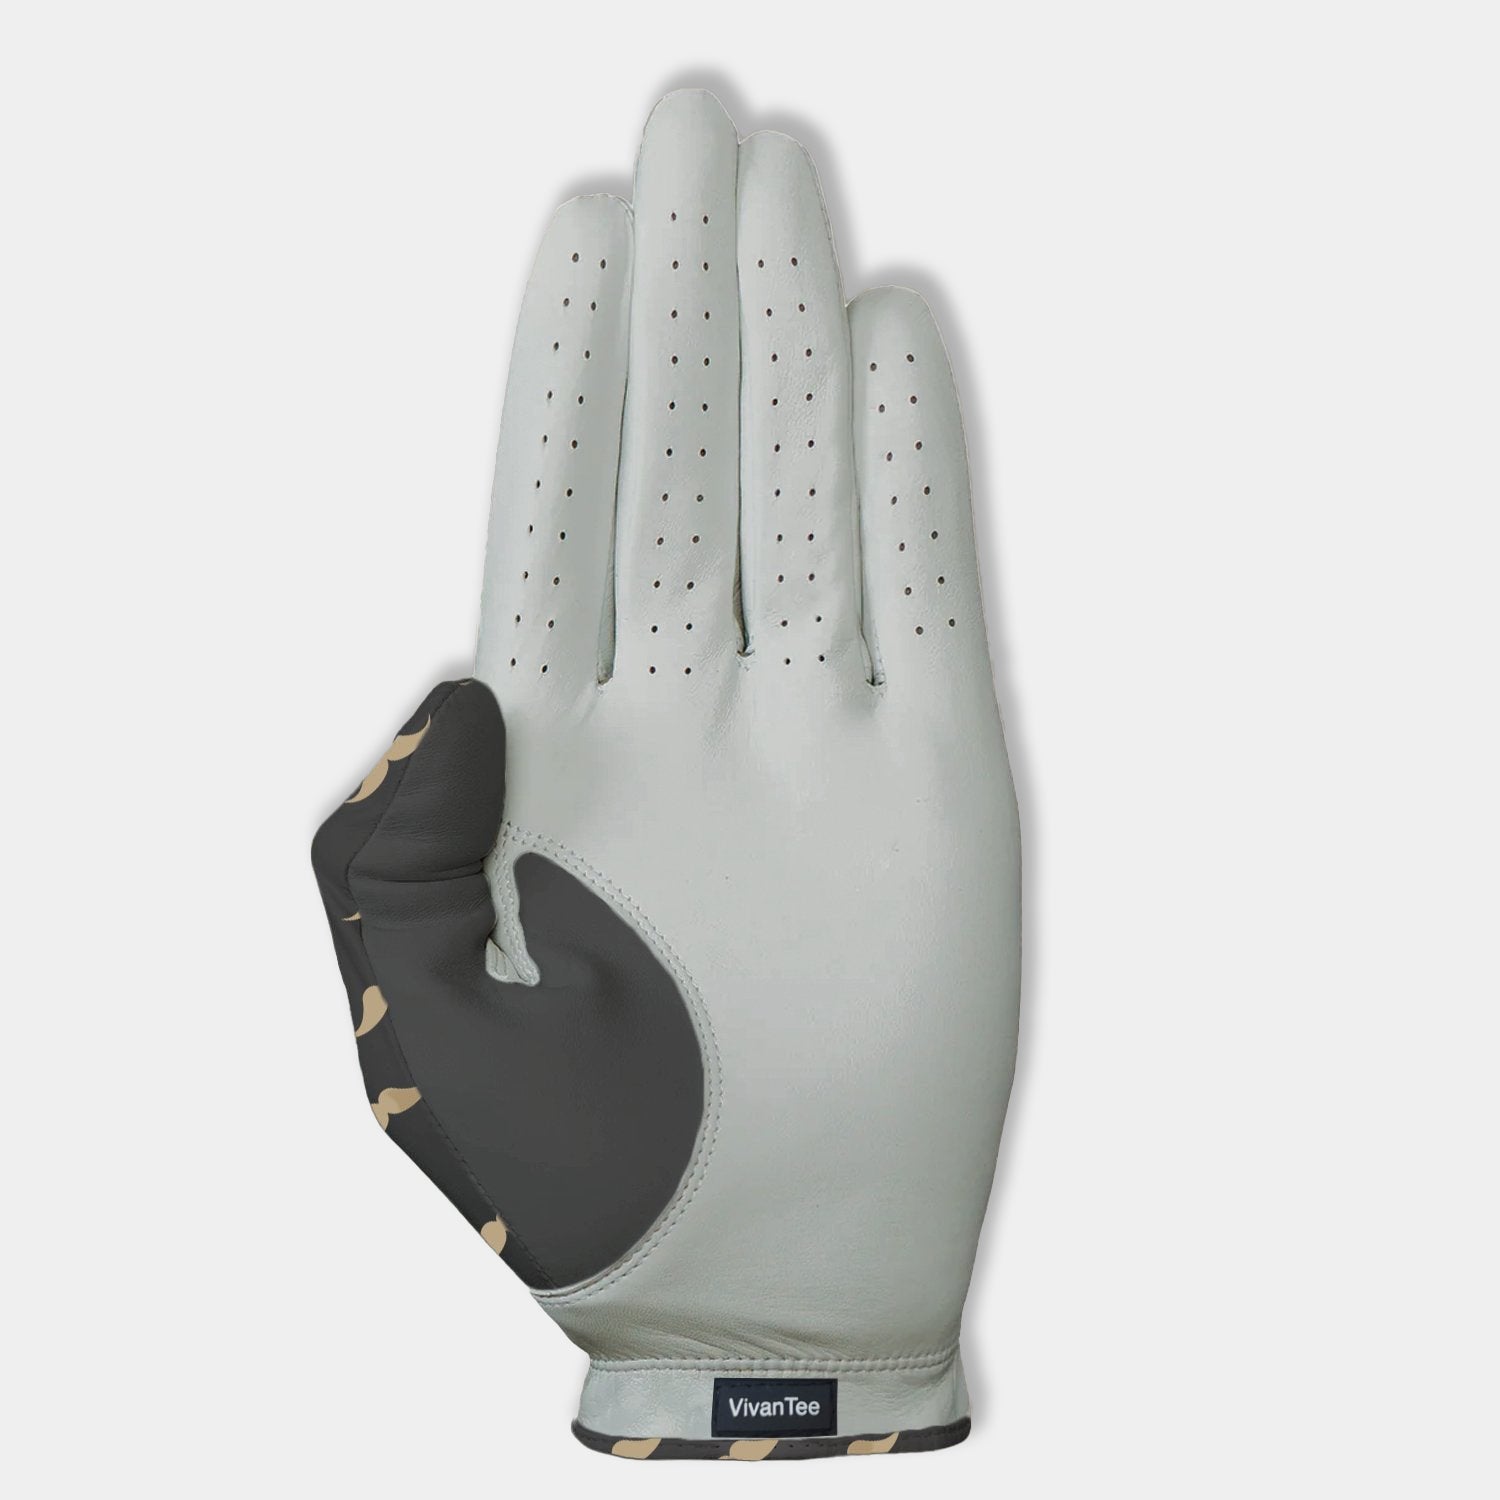 Men's Charcoal and gray golf glove with mustache pattern, bottom showing palm.